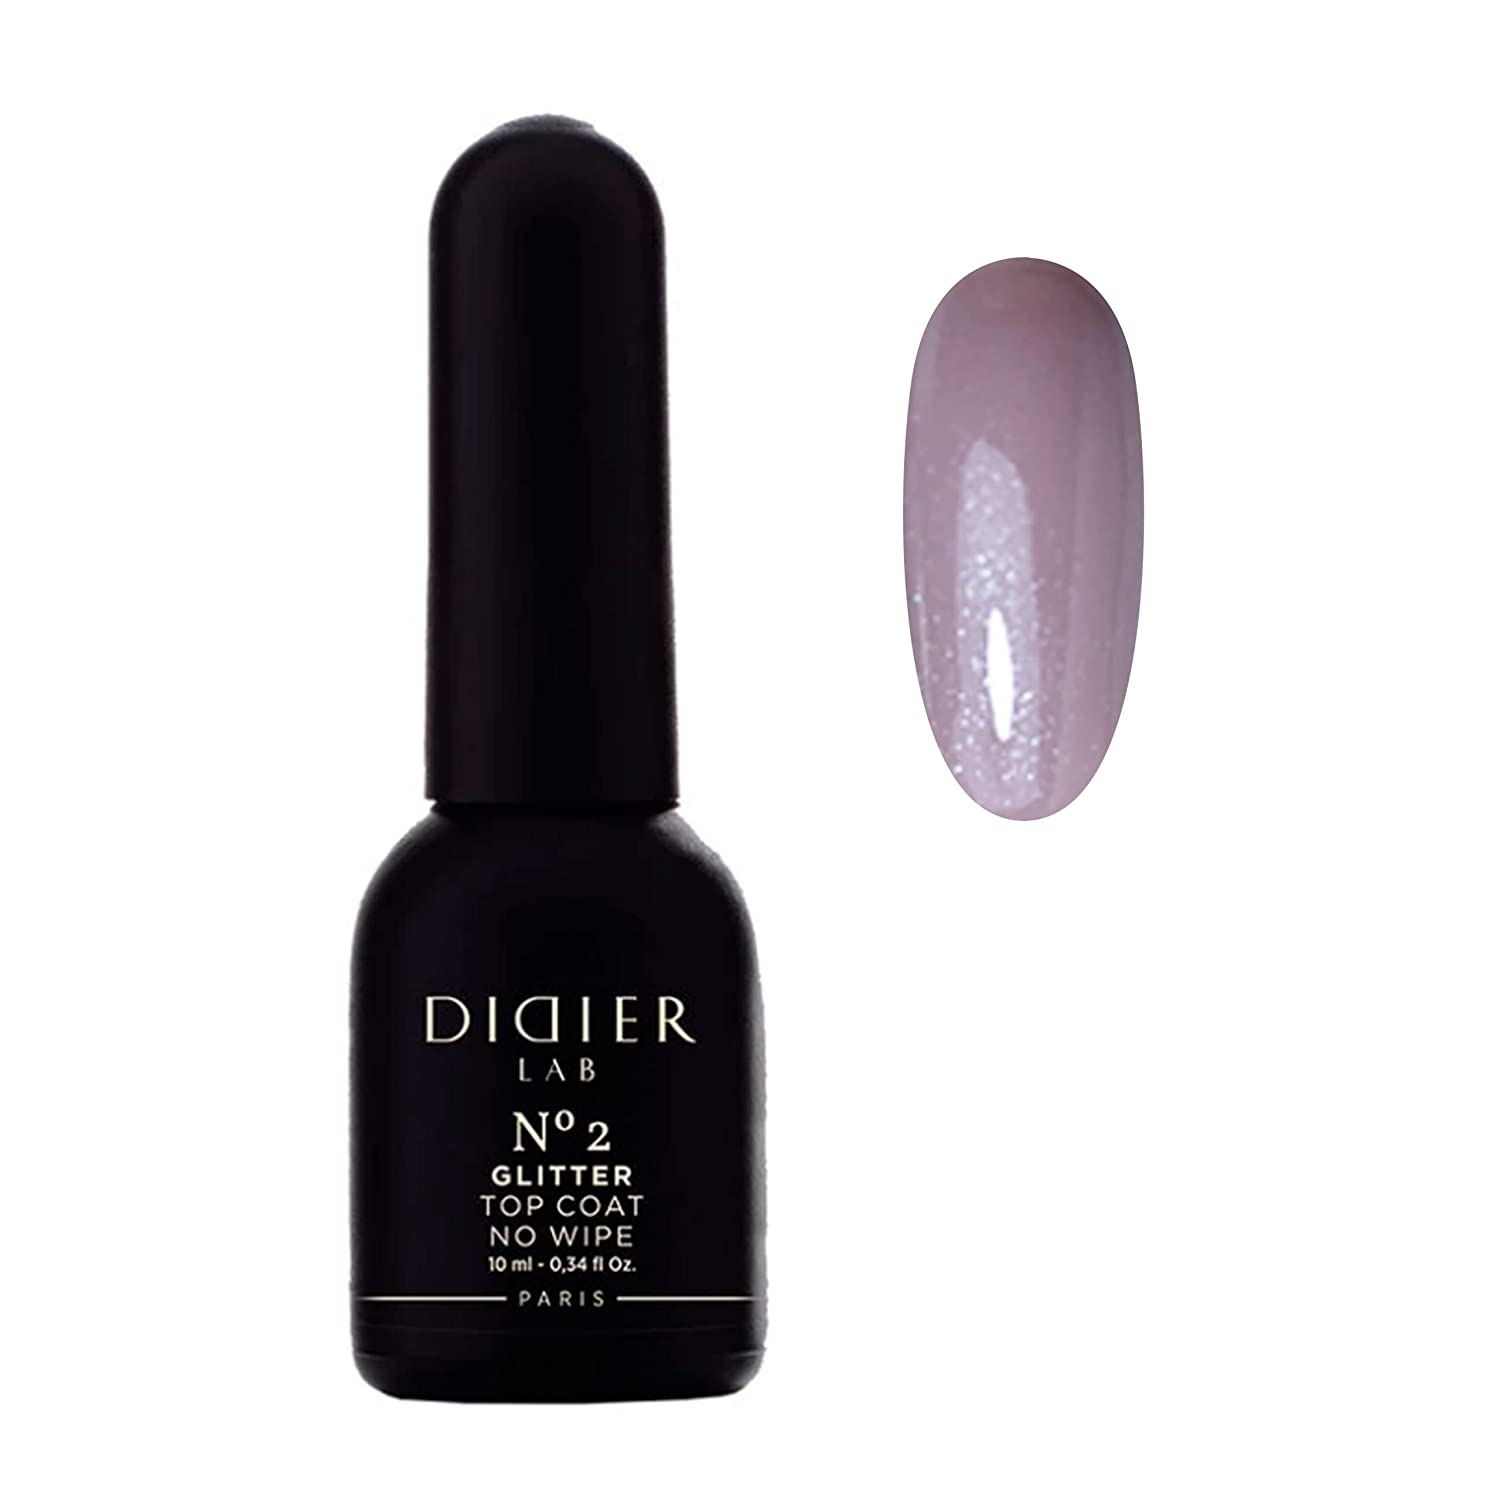 Premium Top Coat No Glitter - Didier Lab - Elite Top Coat - Protection from, ‎glitter